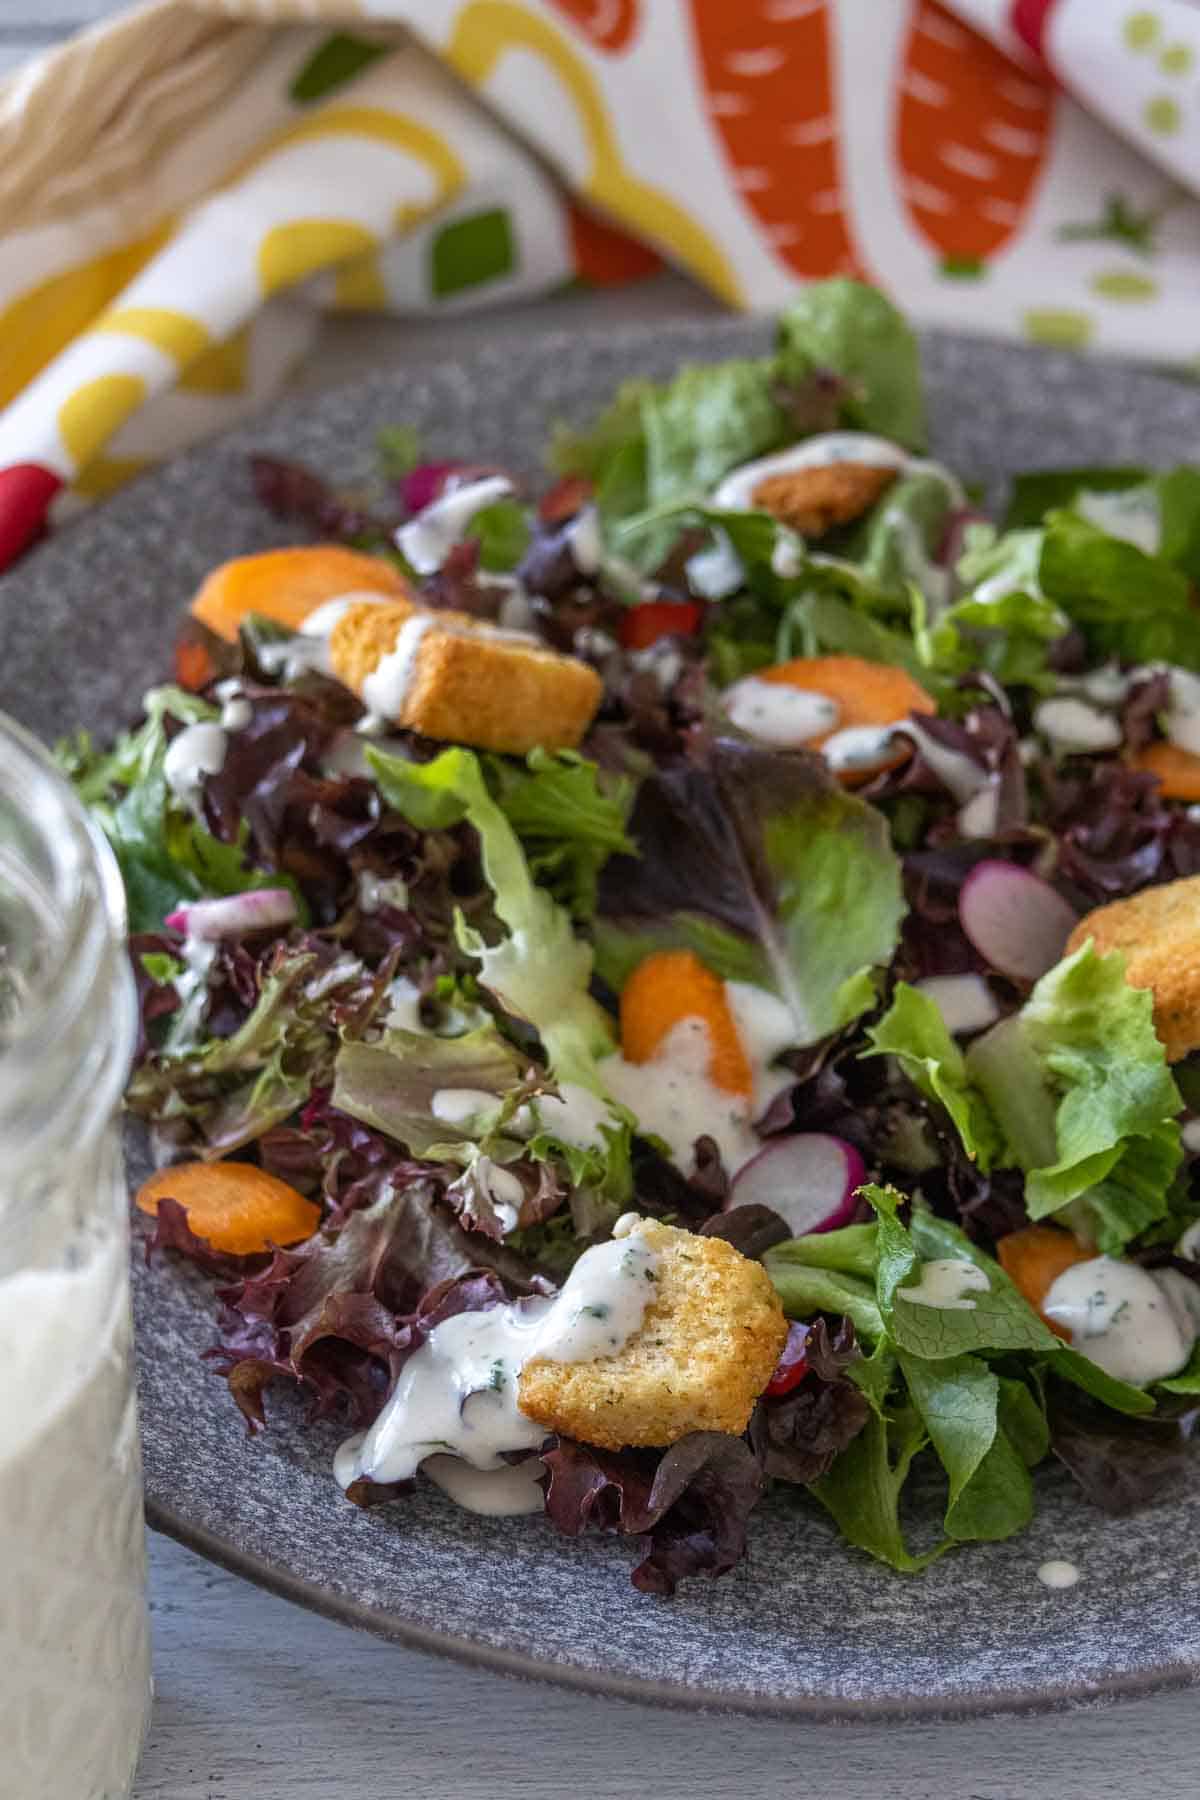 Salad with ranch dressing on a plate.